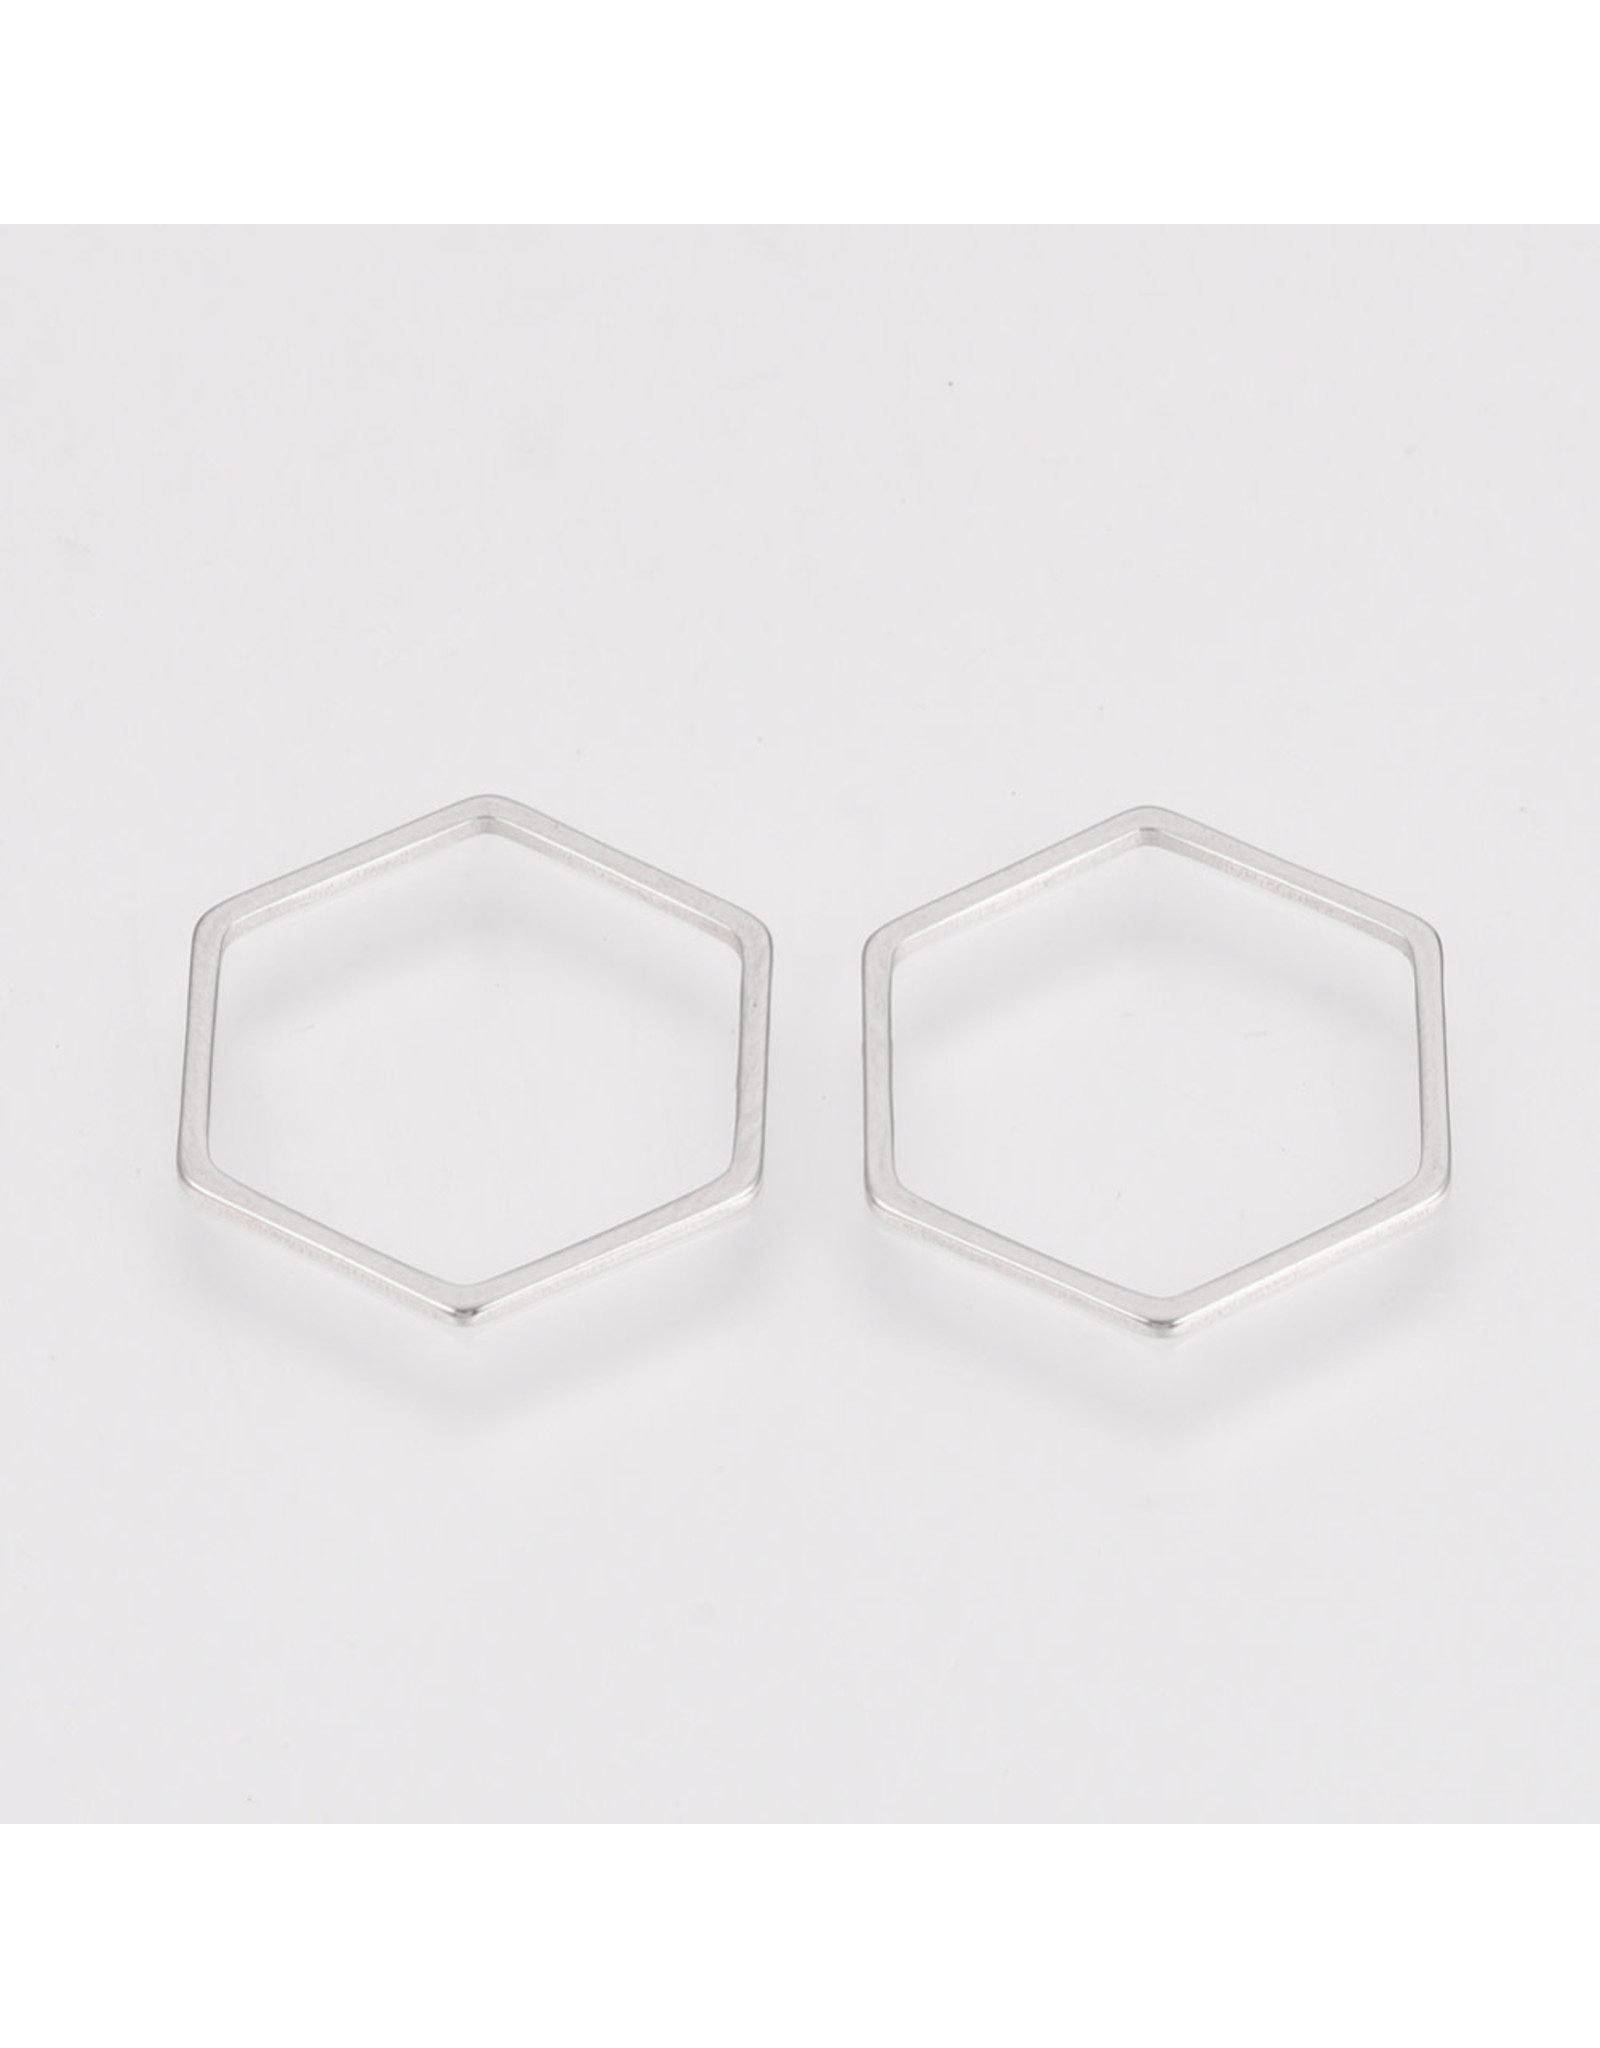 Hexagon Link  16x18mm Stainless Steel  x6  NF